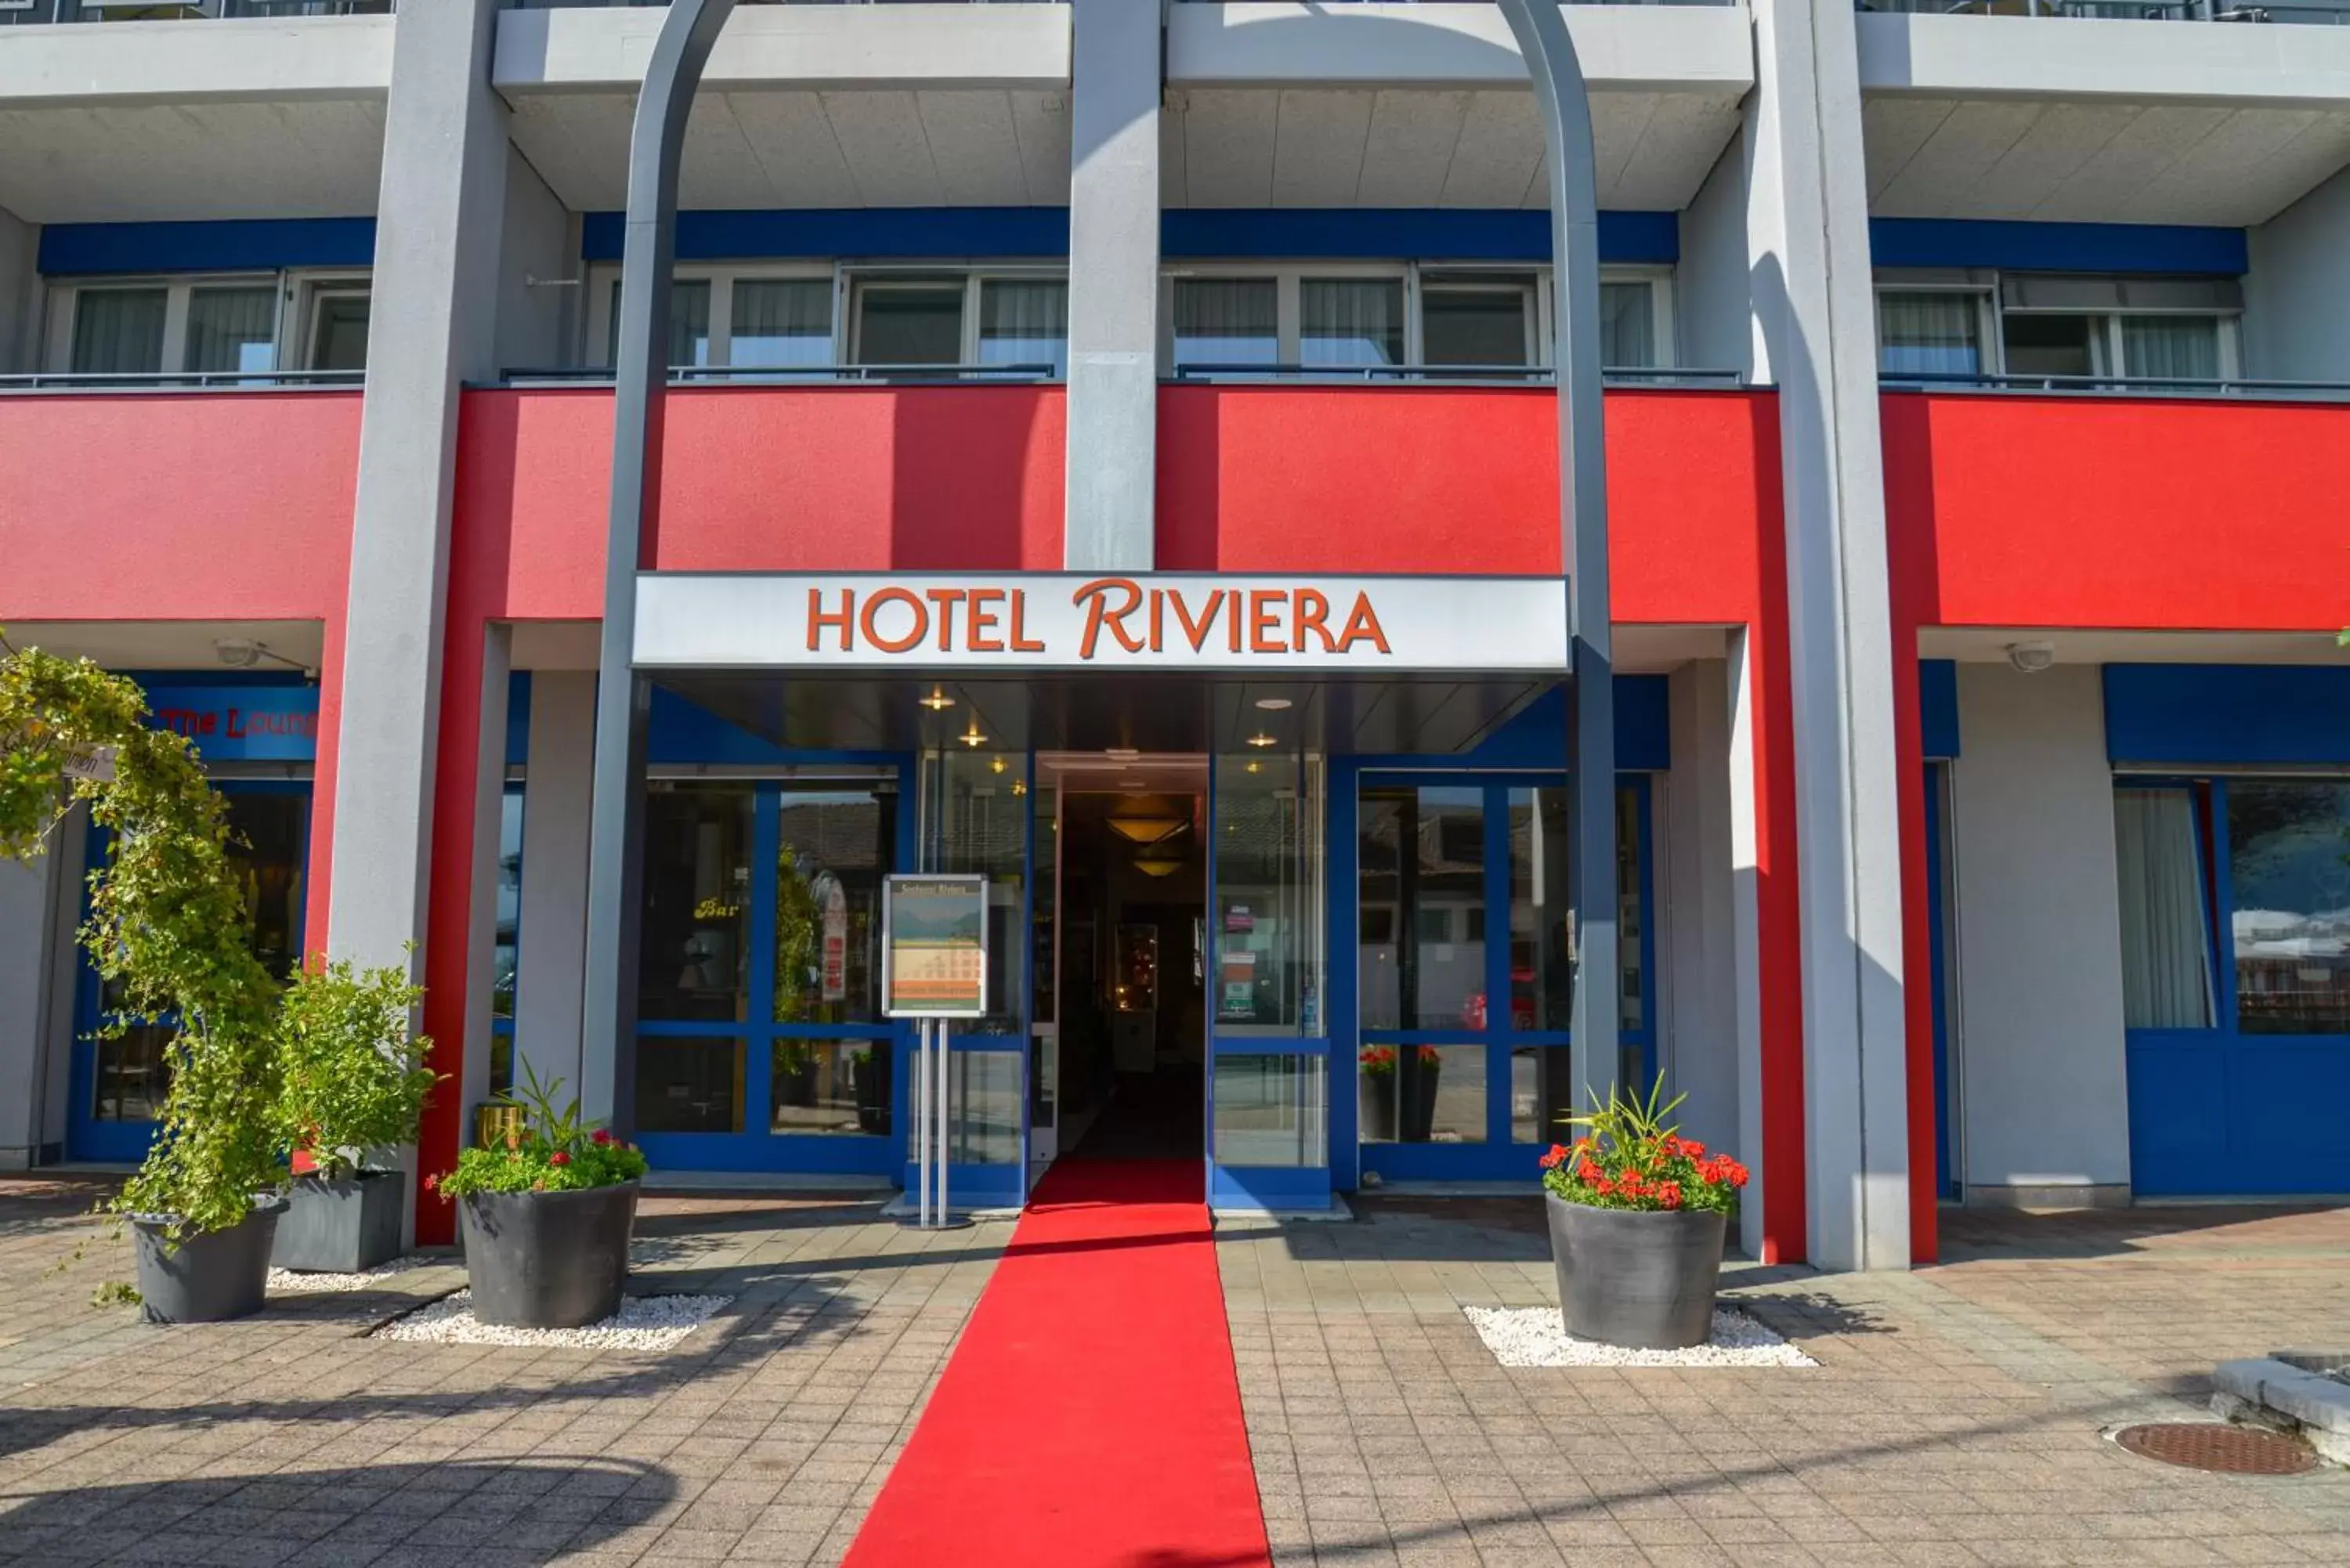 Facade/entrance in Seehotel Riviera at Lake Lucerne